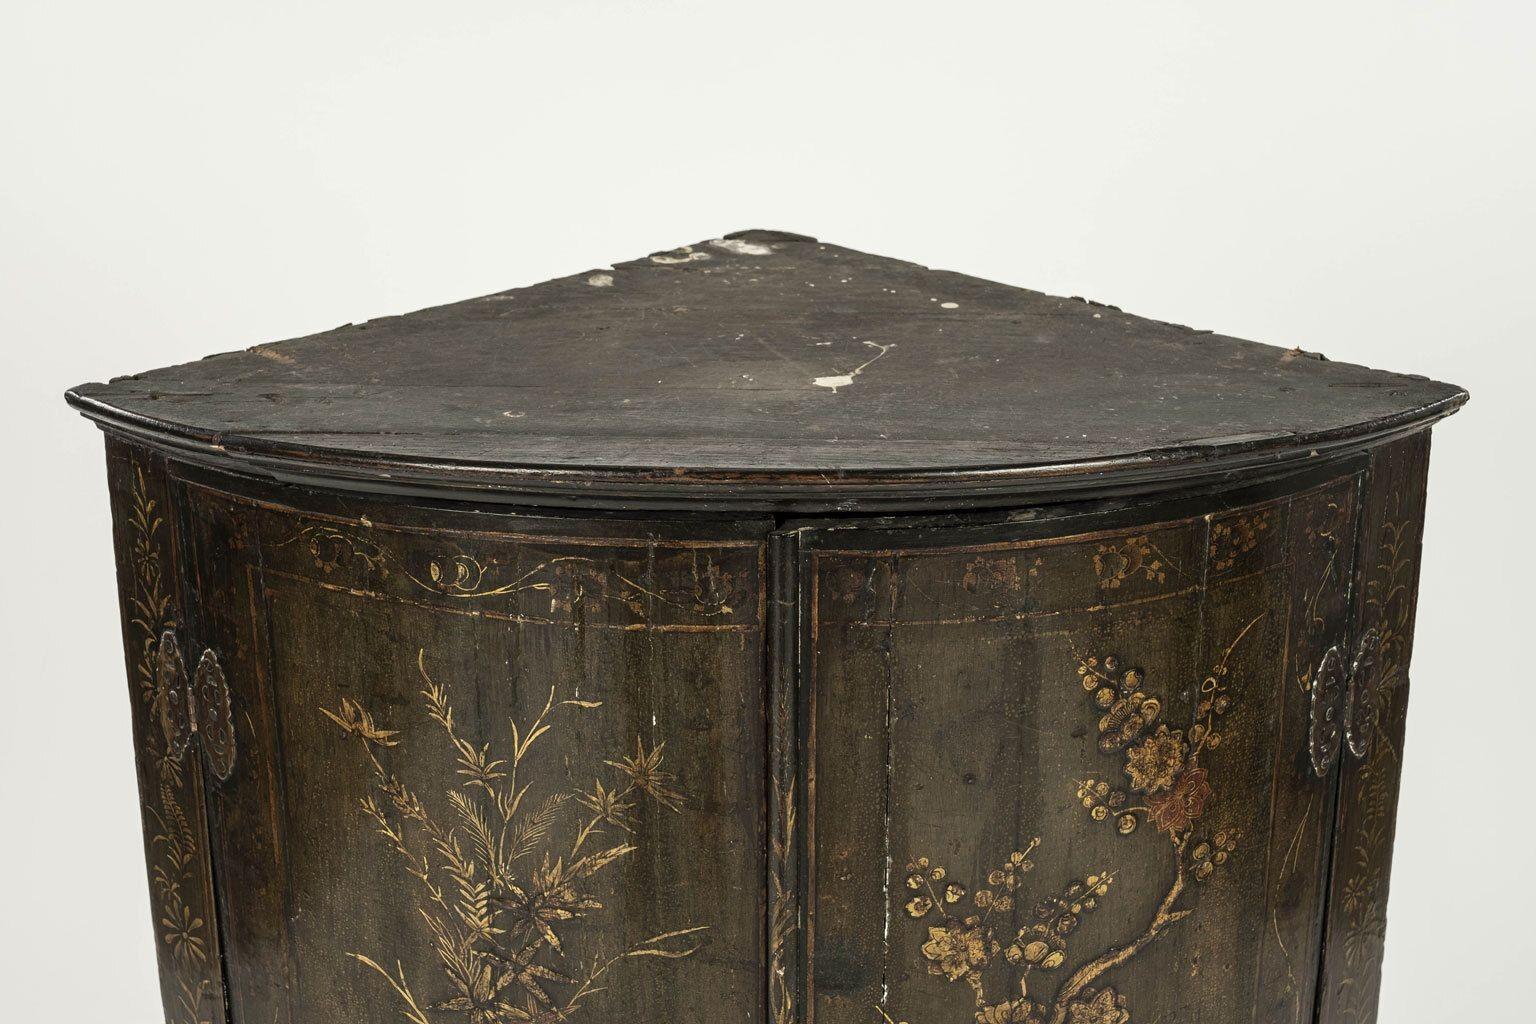 Chinoiseries Armoire d'angle cintrée George III vert olive Chinoiserie en vente